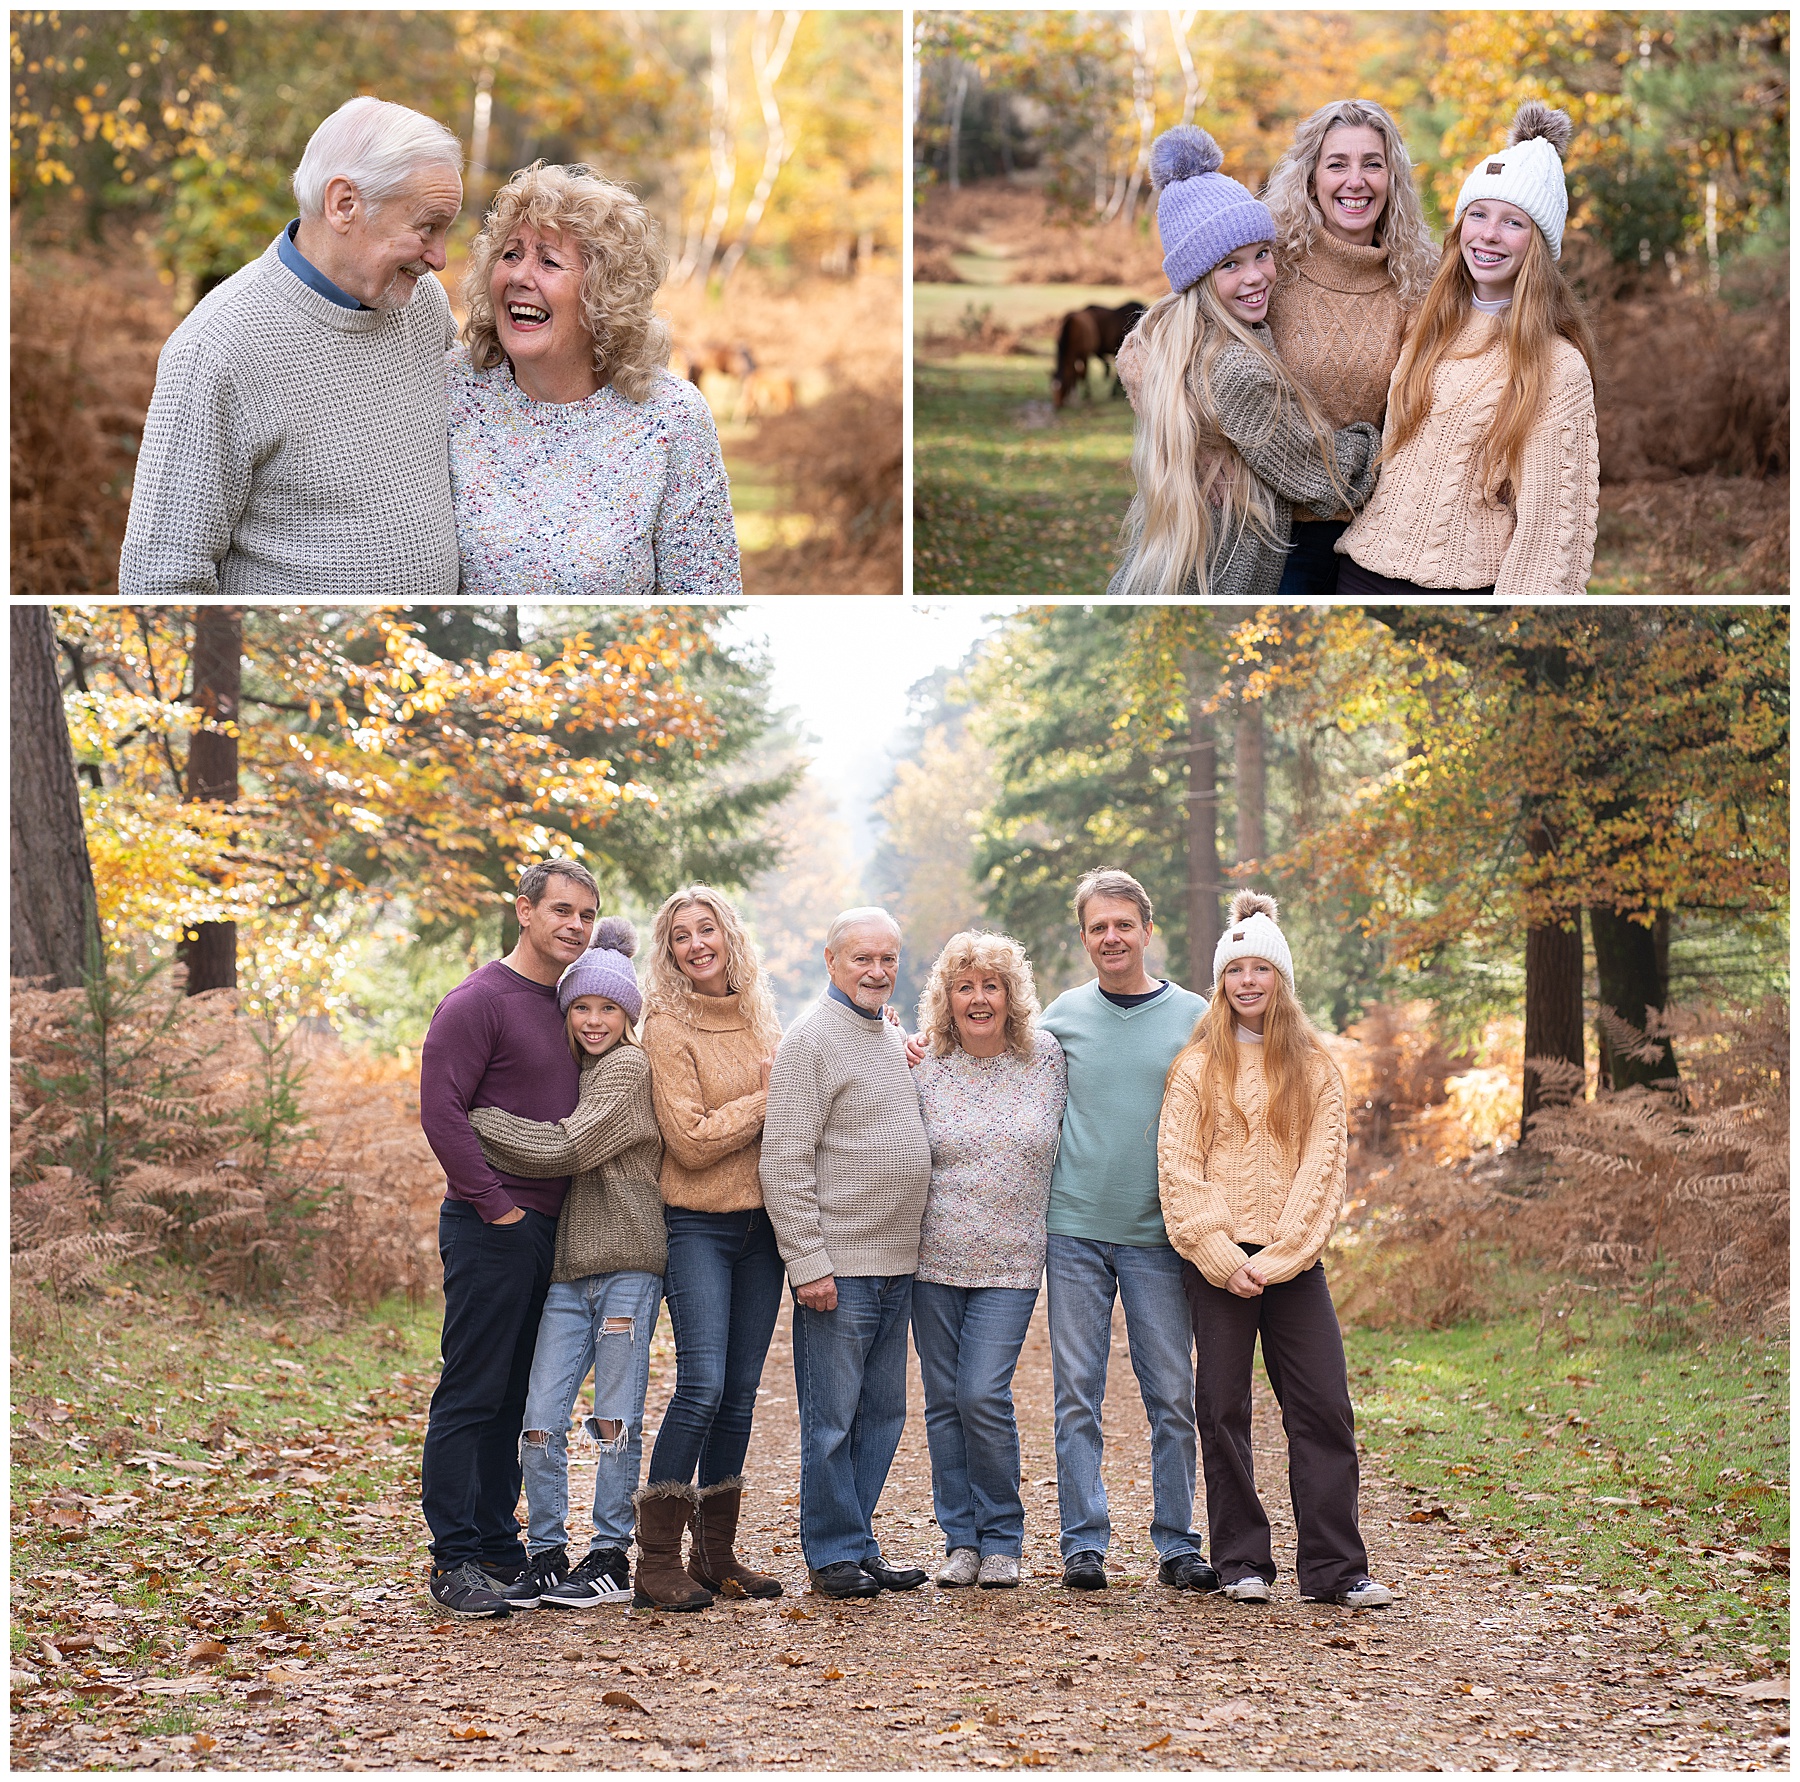 Autumn family mini sessions in the woods